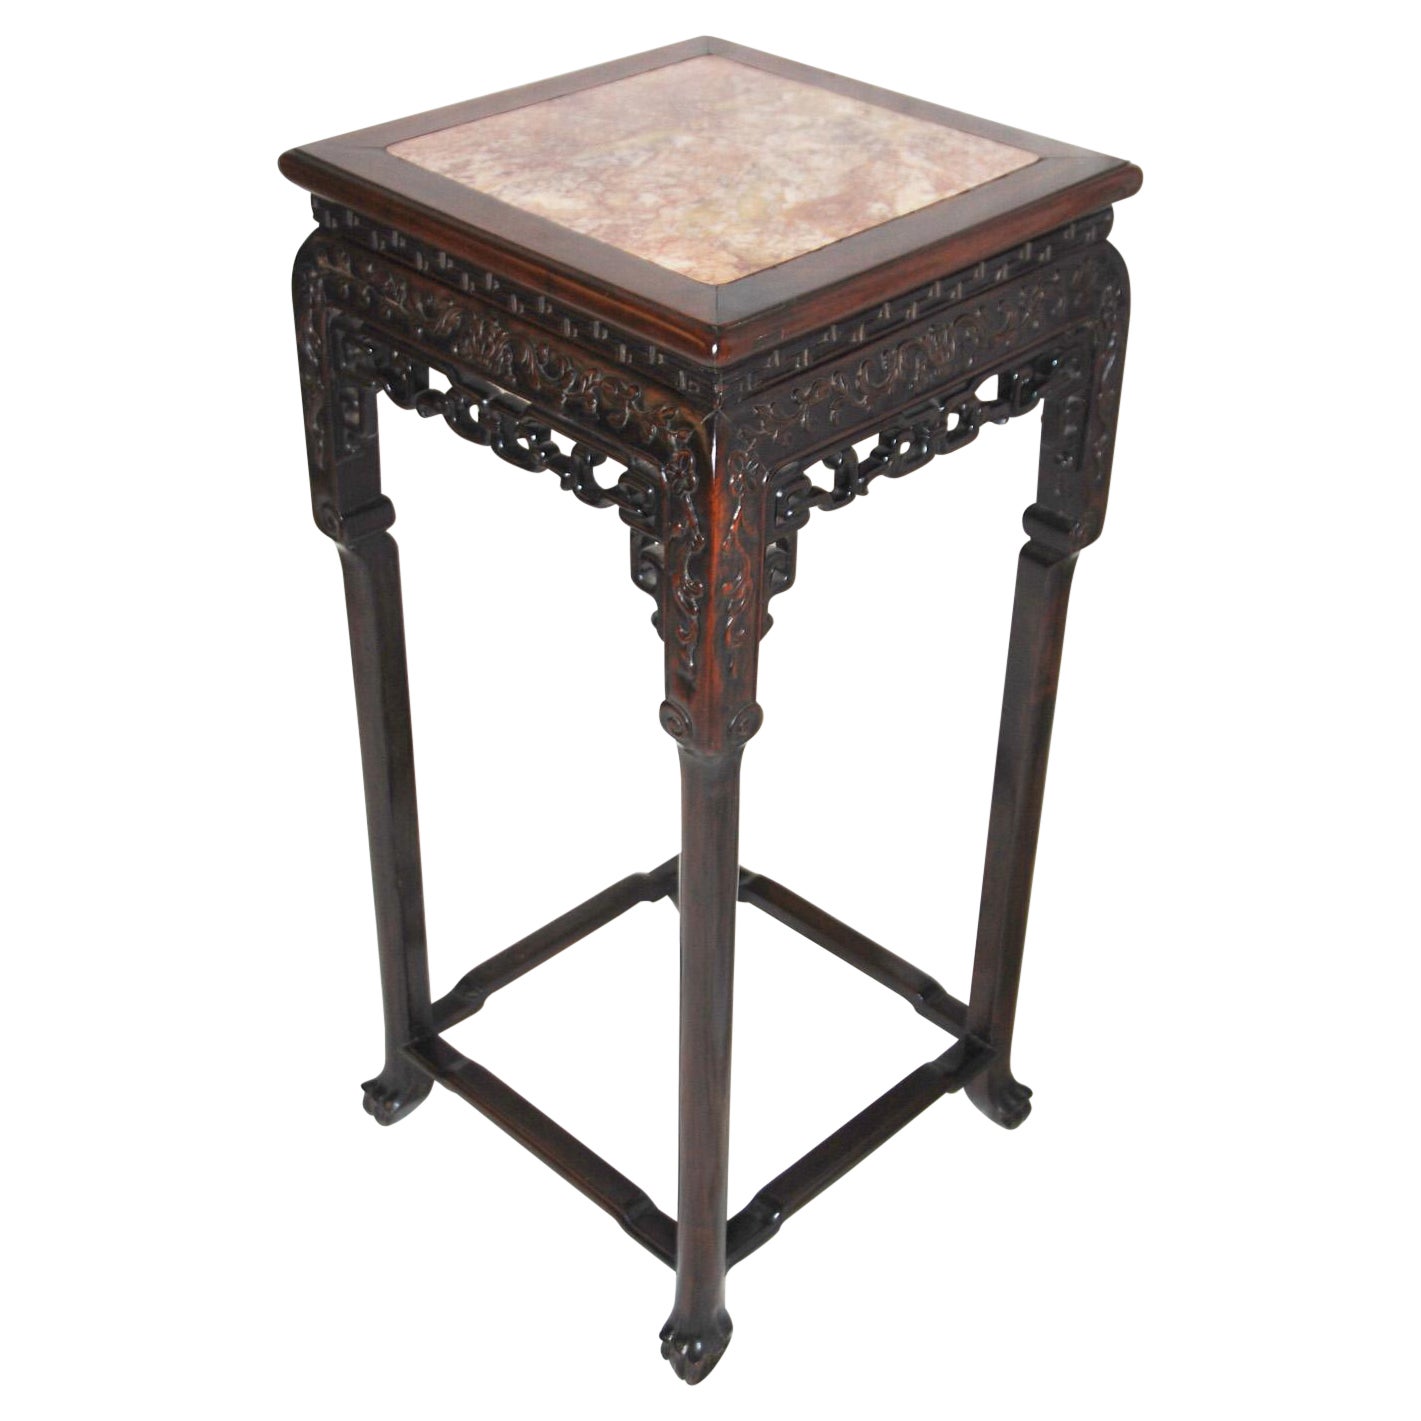 Chinese Qing Dynasty 19th Century Carved Hardwood with Marble Inset Stand